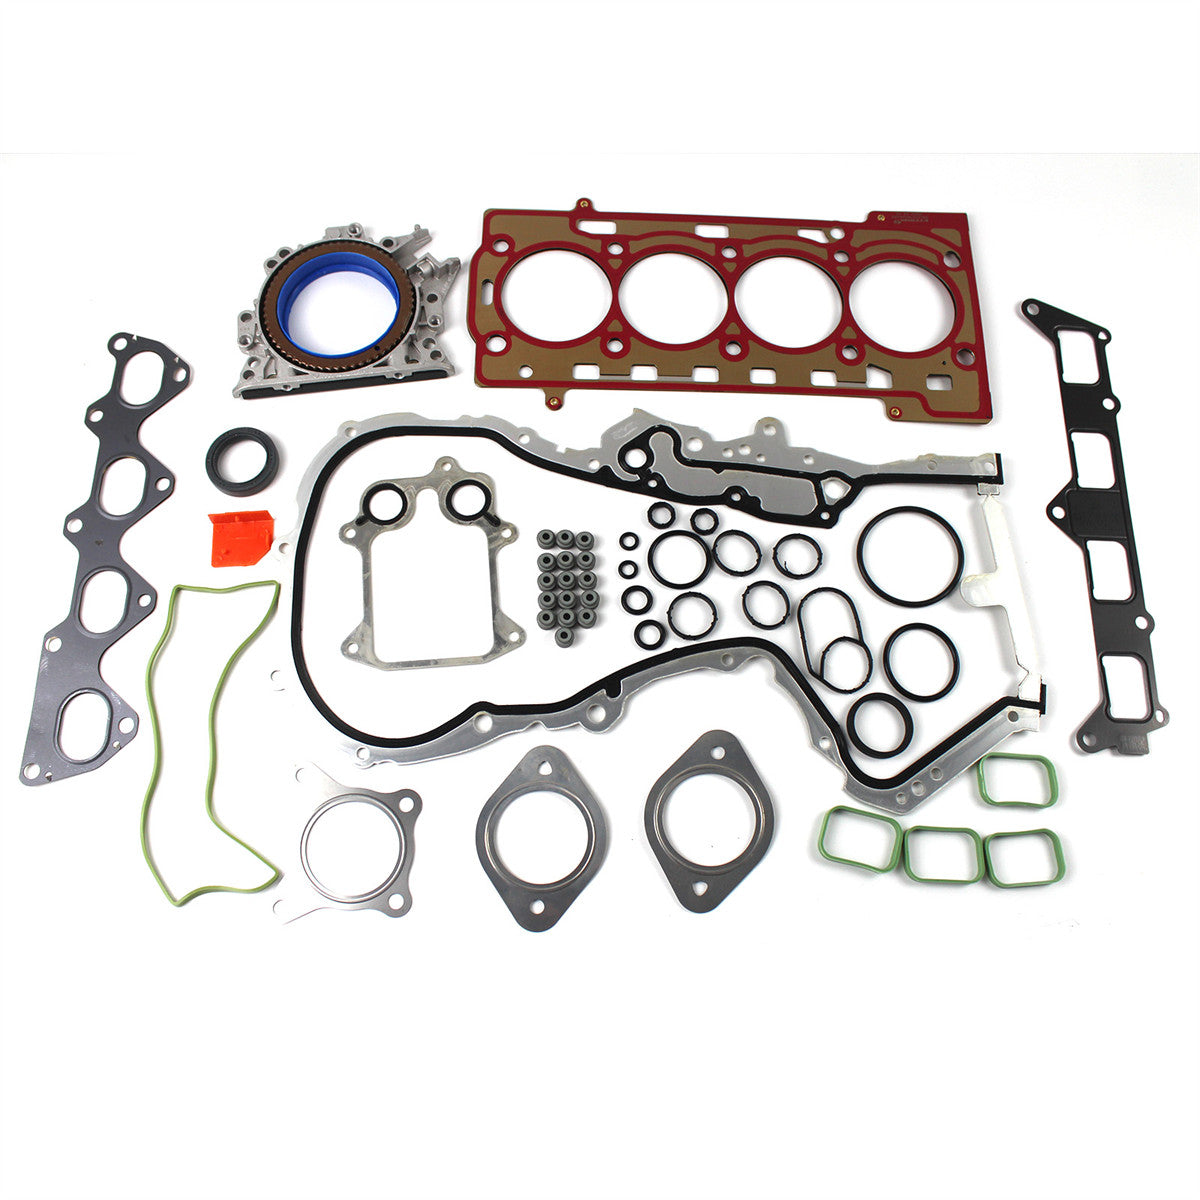 EA111 Gasket Kit Engine Cylinder Full Set Replacement for VW AU/D-I 1.4T CAV CTH CNW CKM CNW - Sinocmp